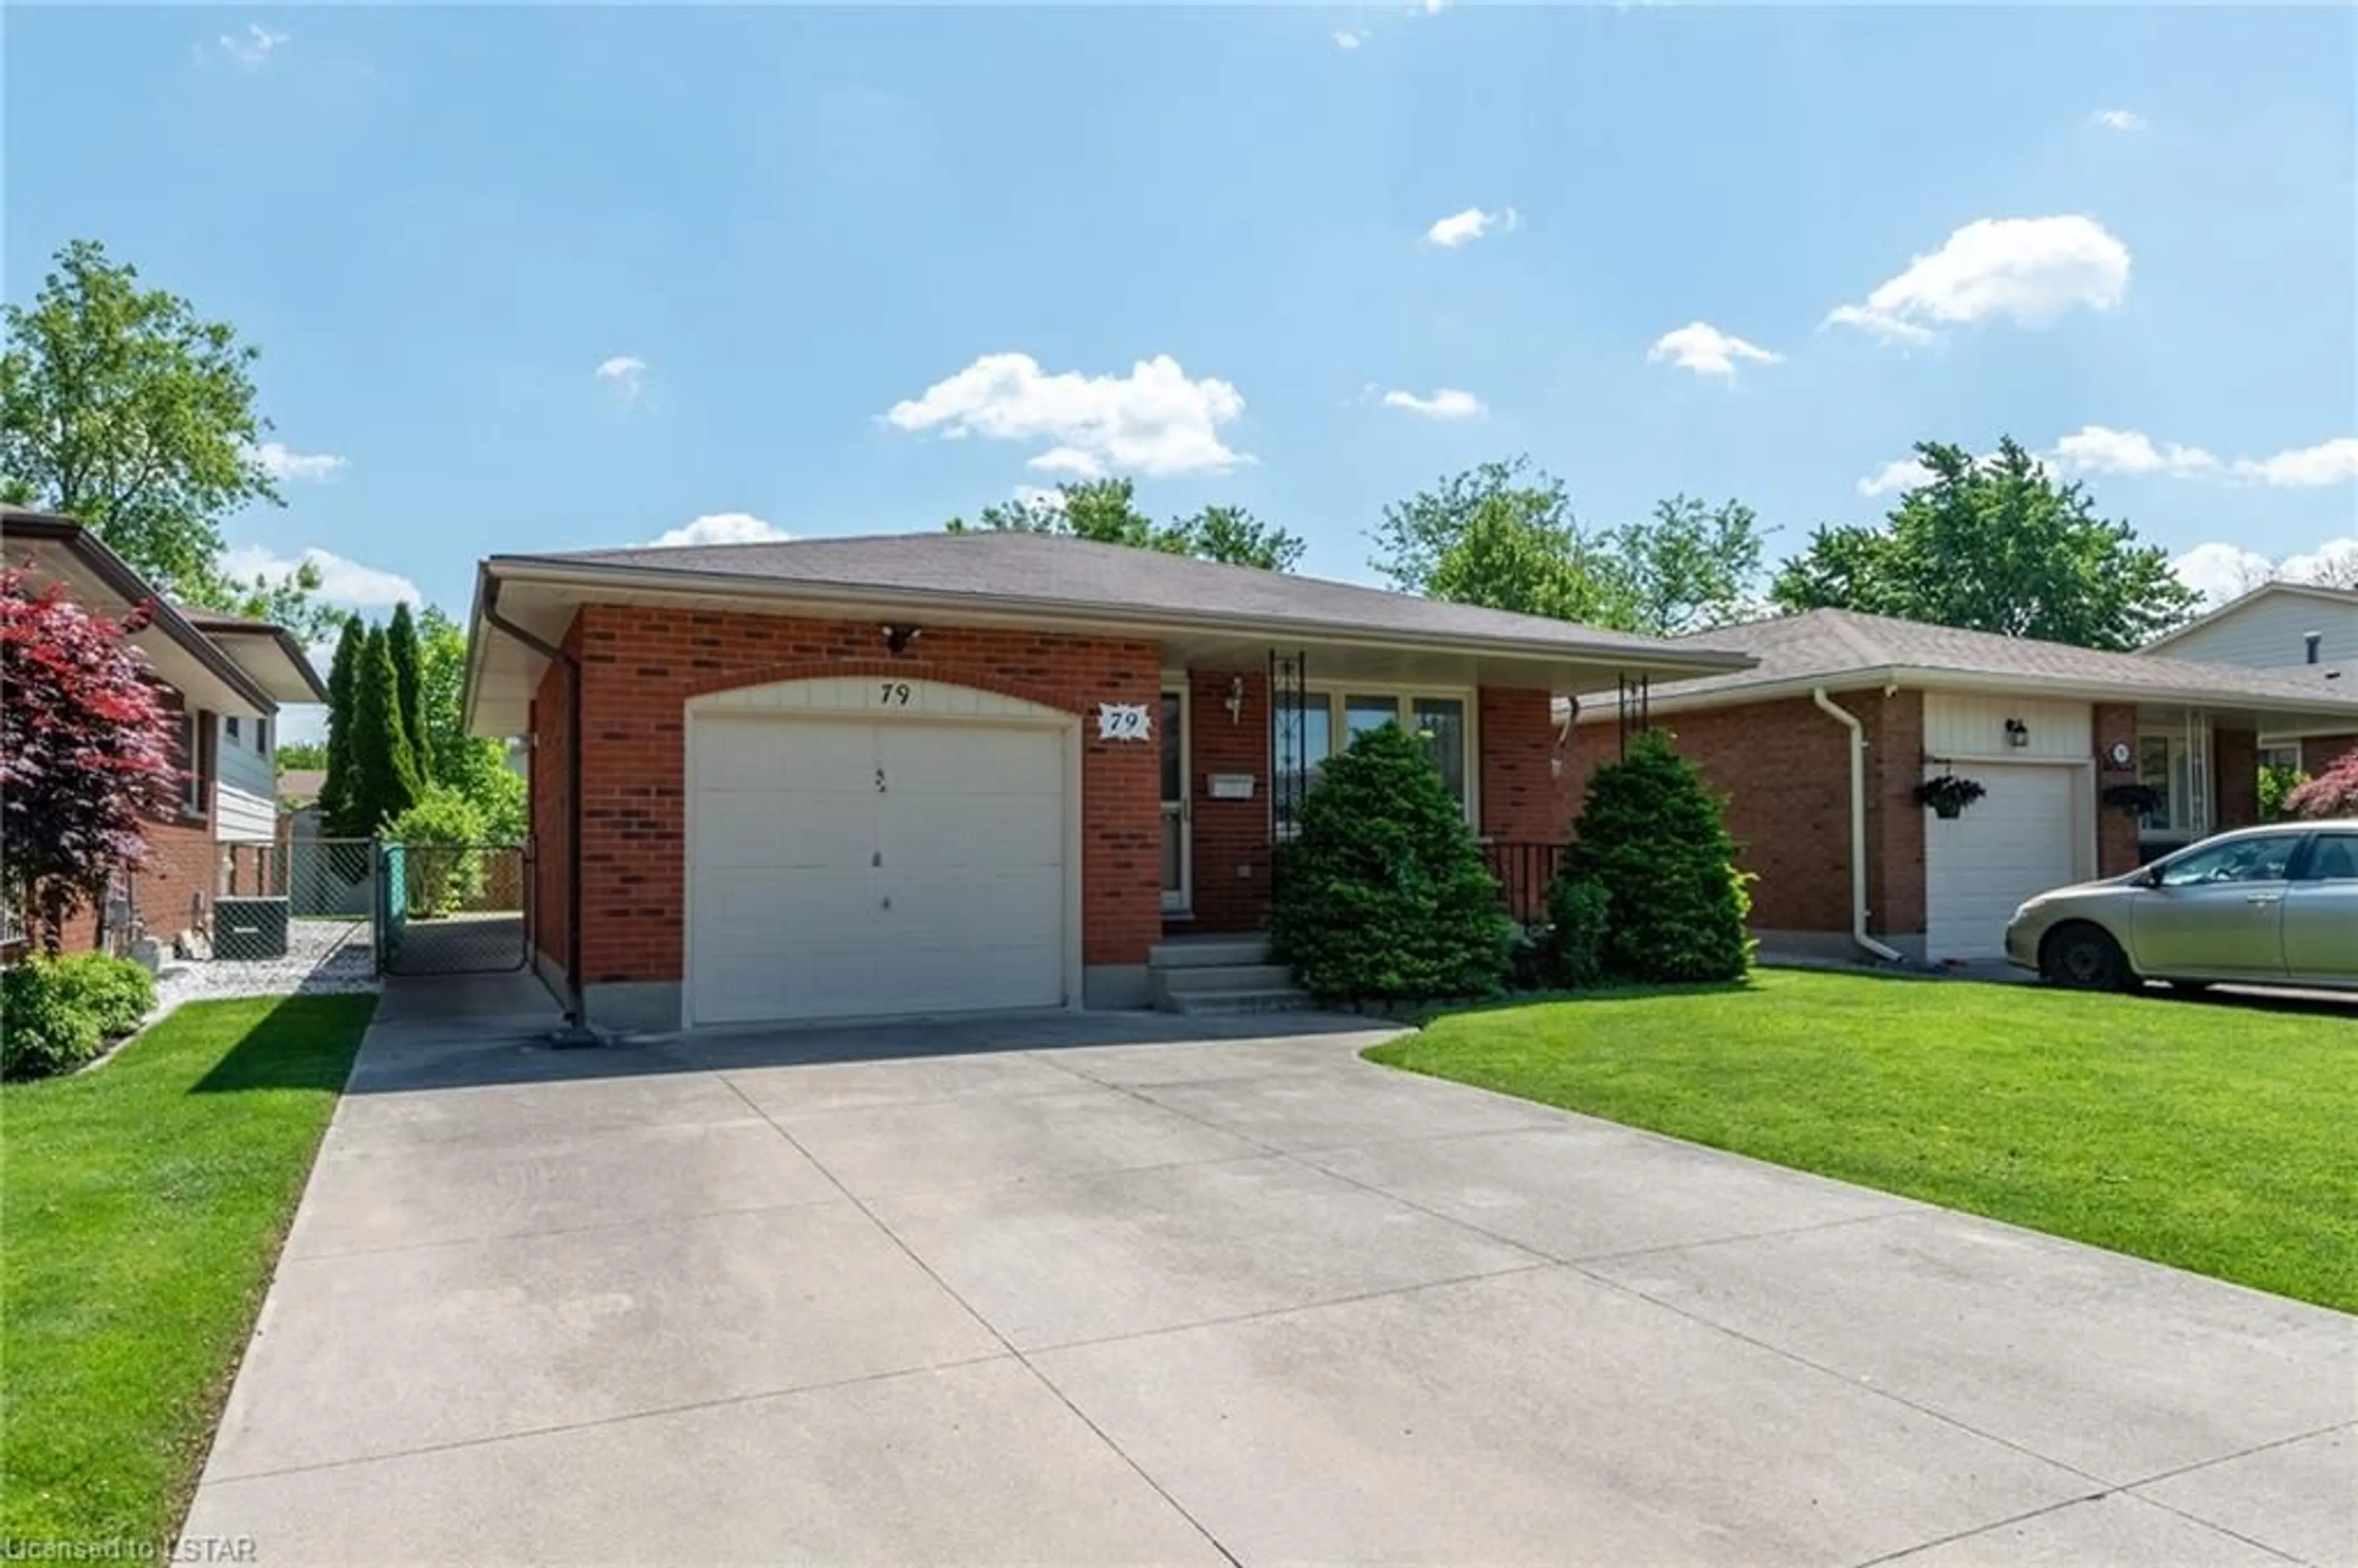 Home with brick exterior material for 79 Roundhill Crt, London Ontario N5Z 4N3